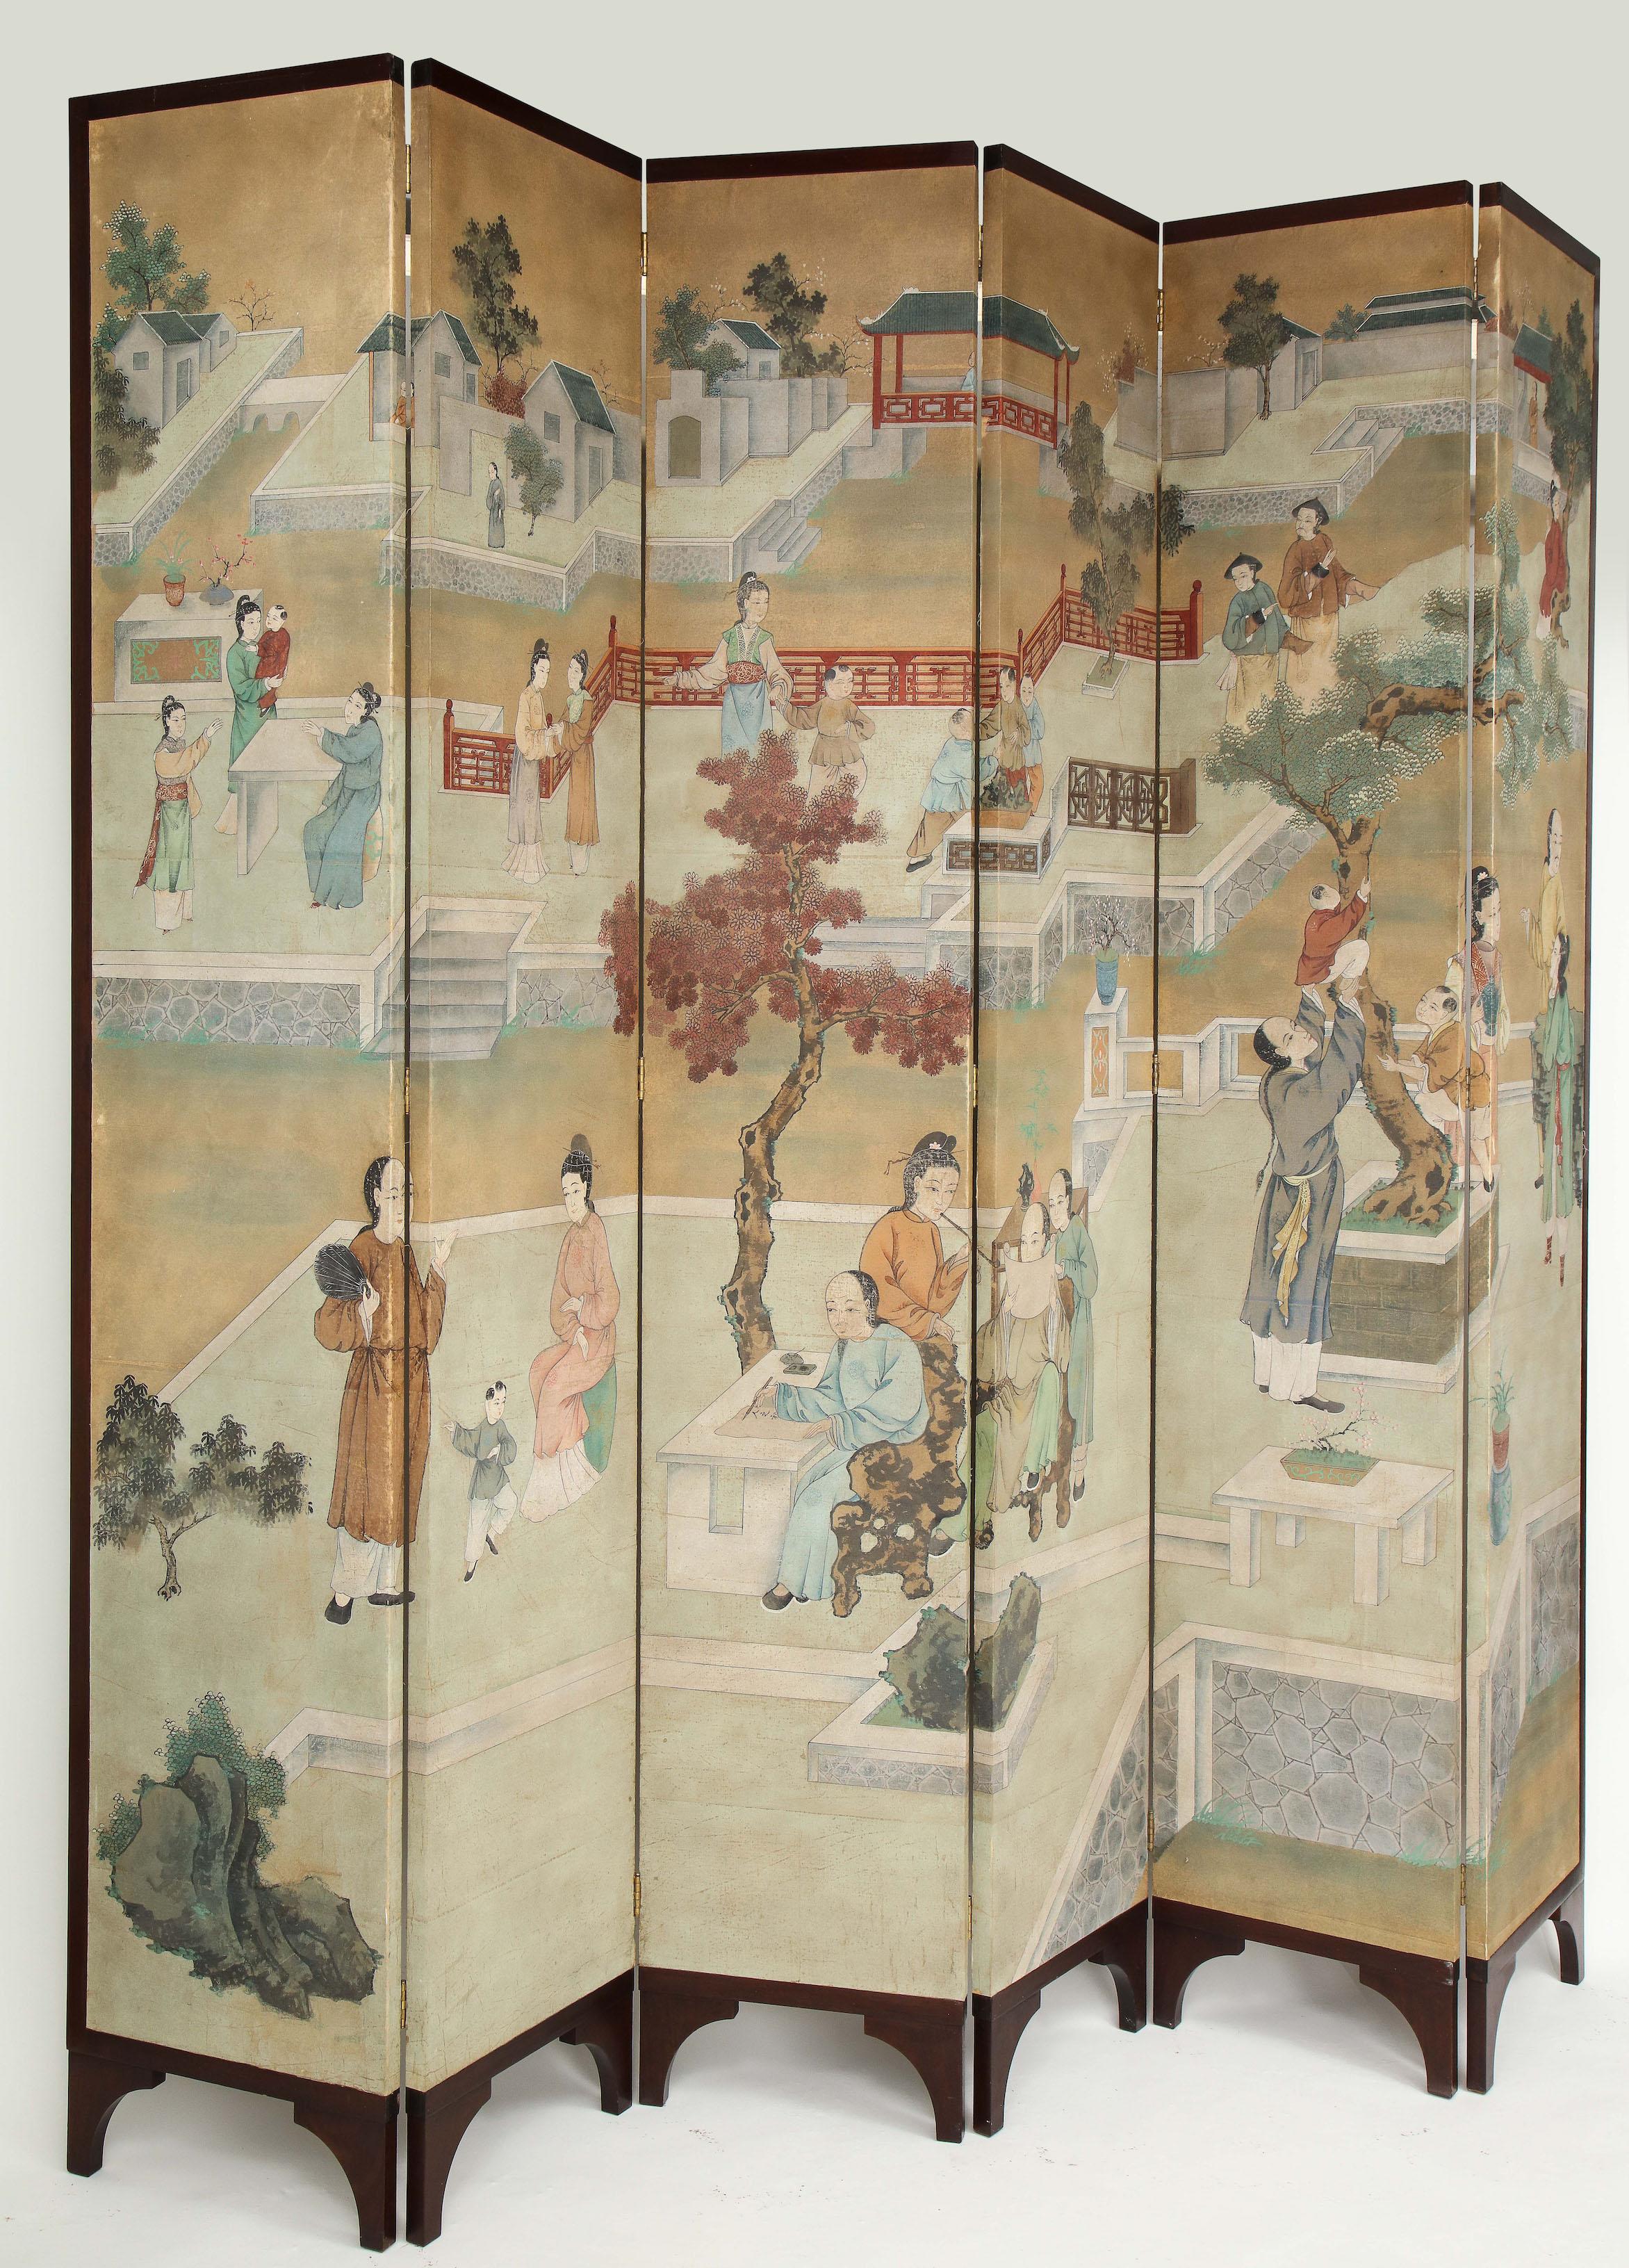 Finely painted Chinoiserie with Mandarin court figures engaged in leisurely and scholarly pursuits outdoors. Featuring a soft palette of parchment, blues, and green. With a solid dark wood back and on bracket feet.